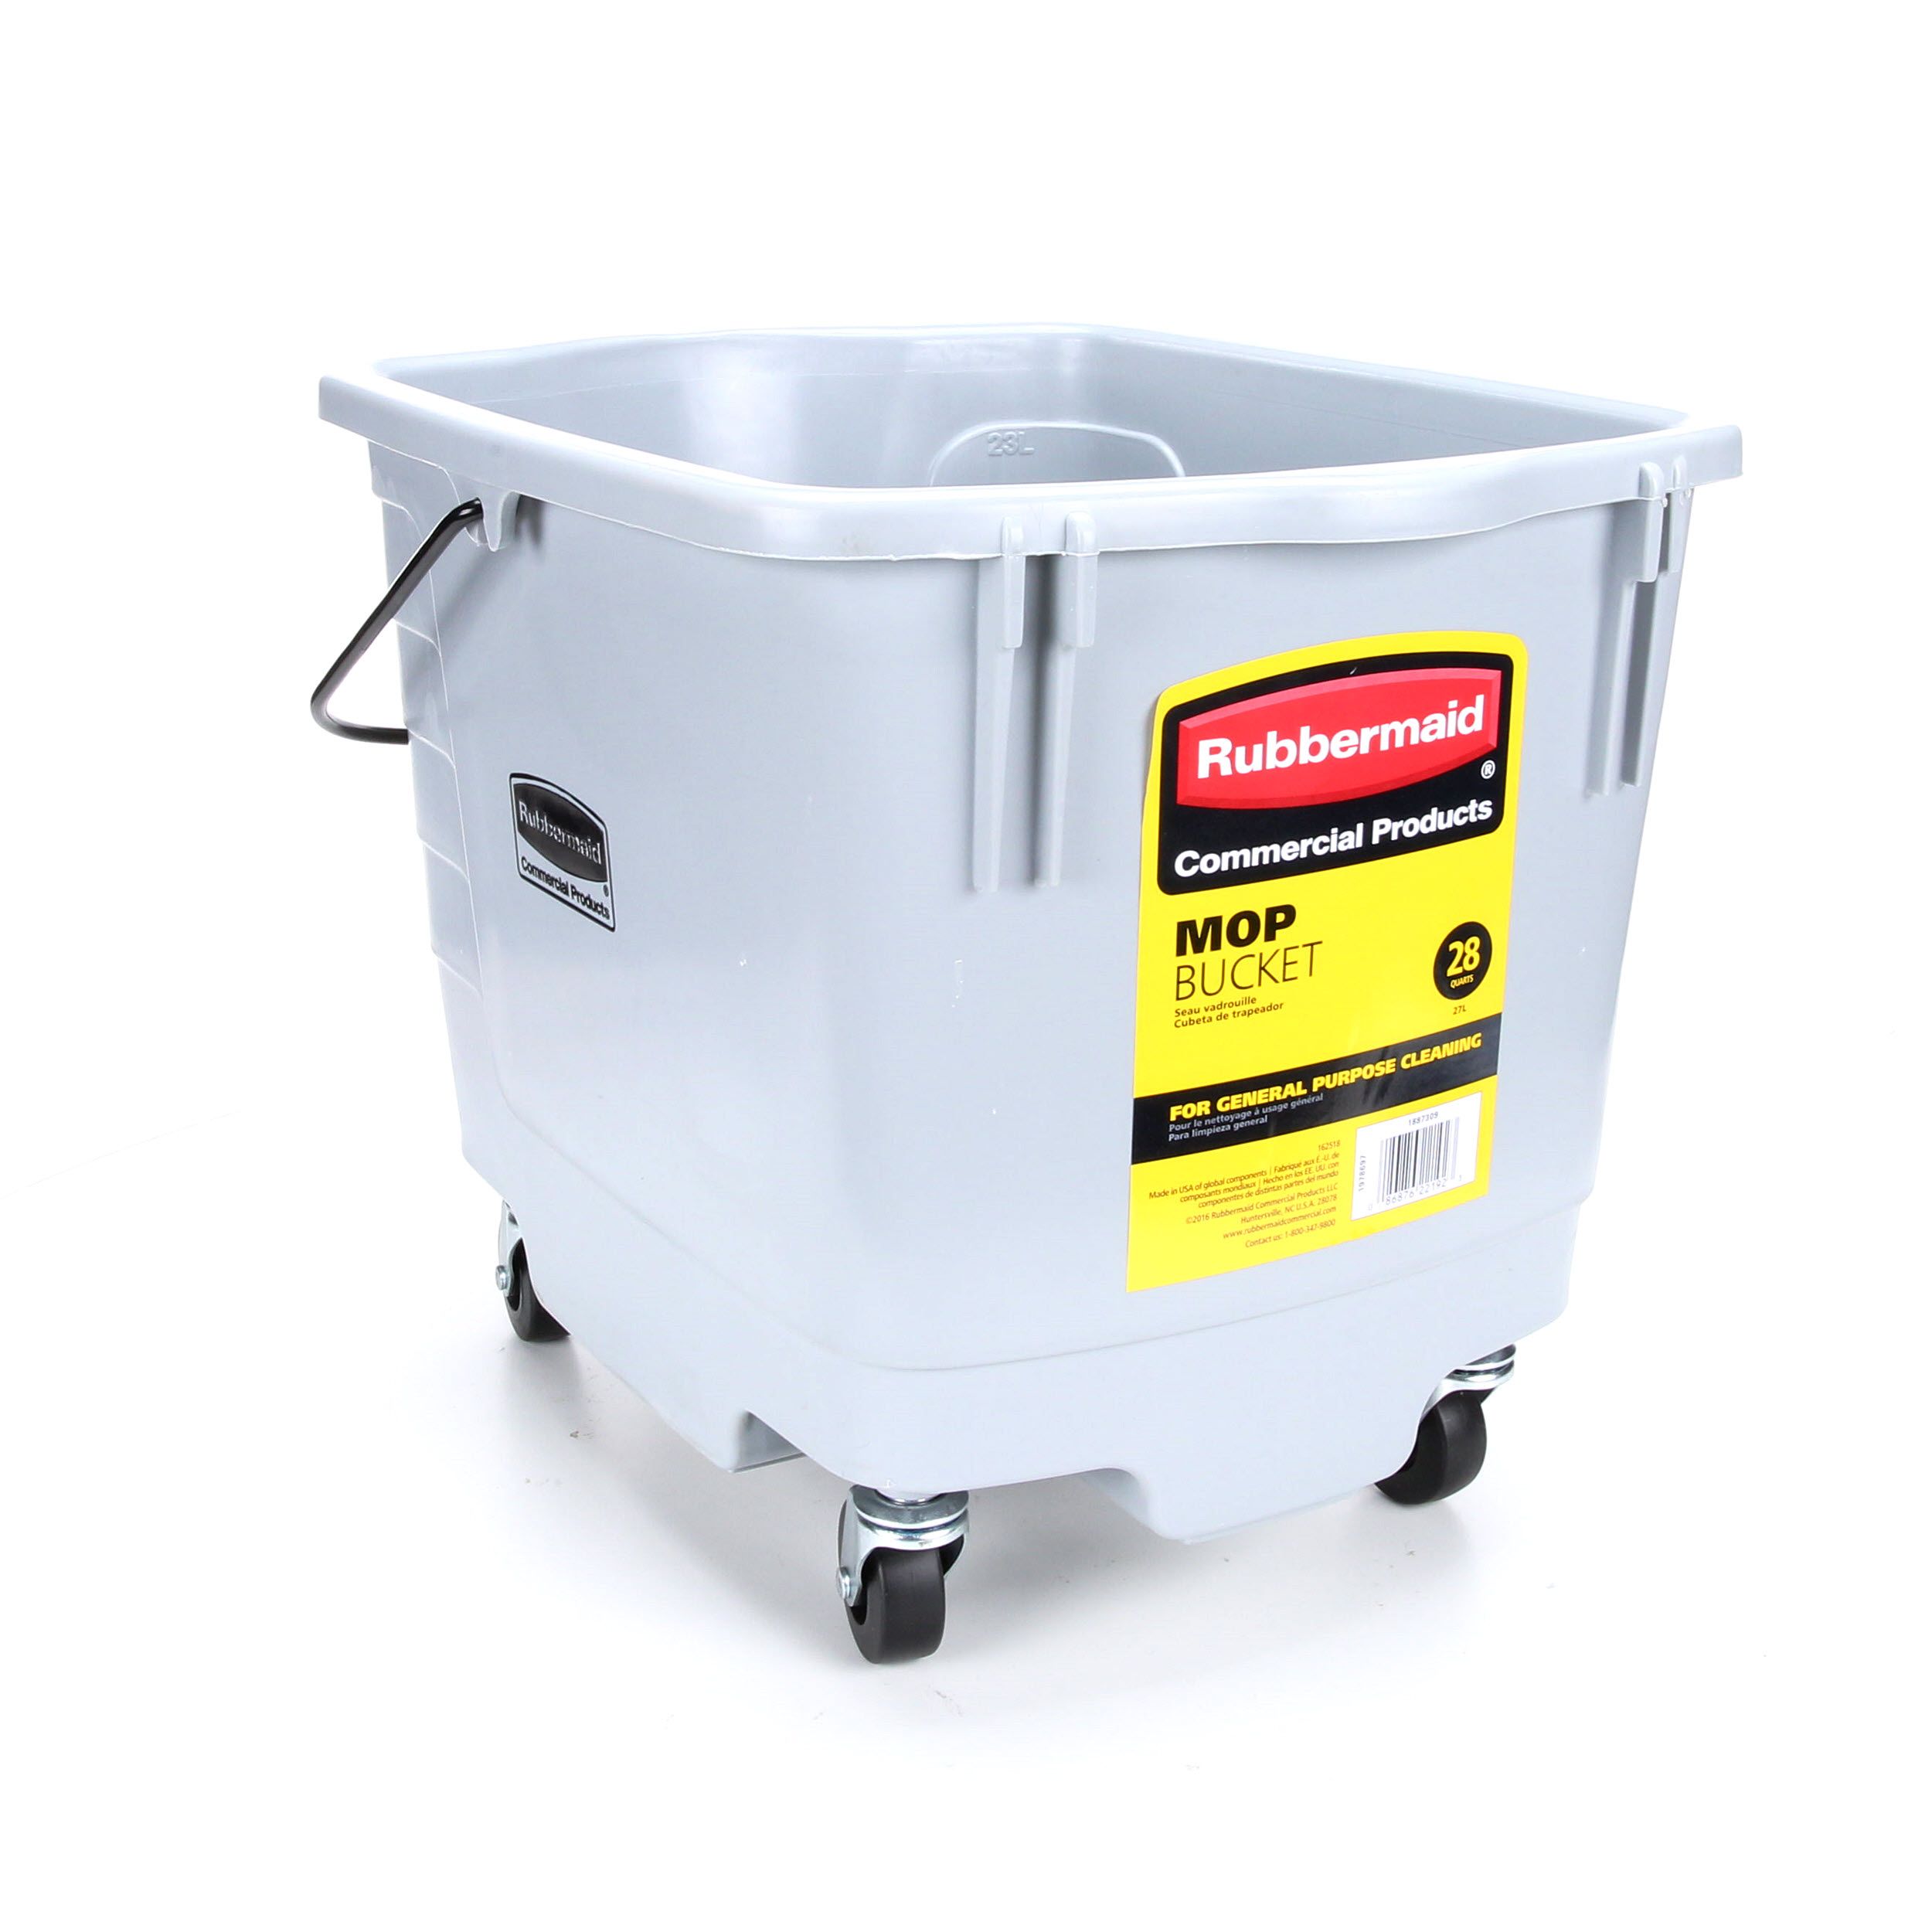 Rubbermaid 28-Quart General Purpose Bucket with Wheels Cleaning Built-in Handle 